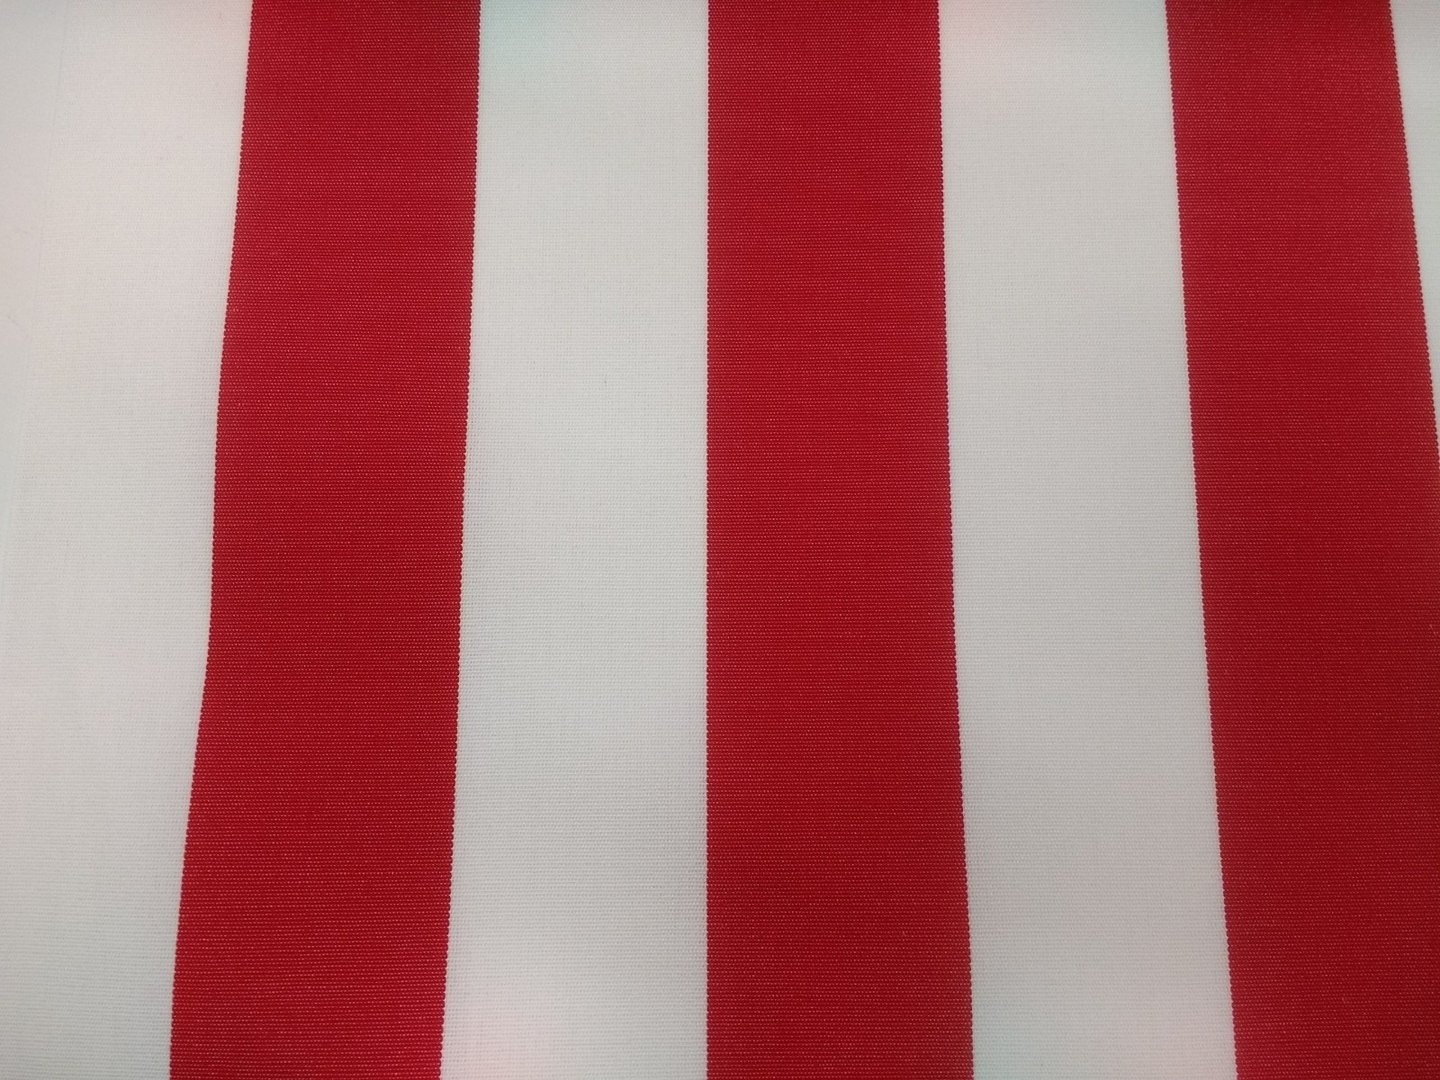 Striped awning red and white